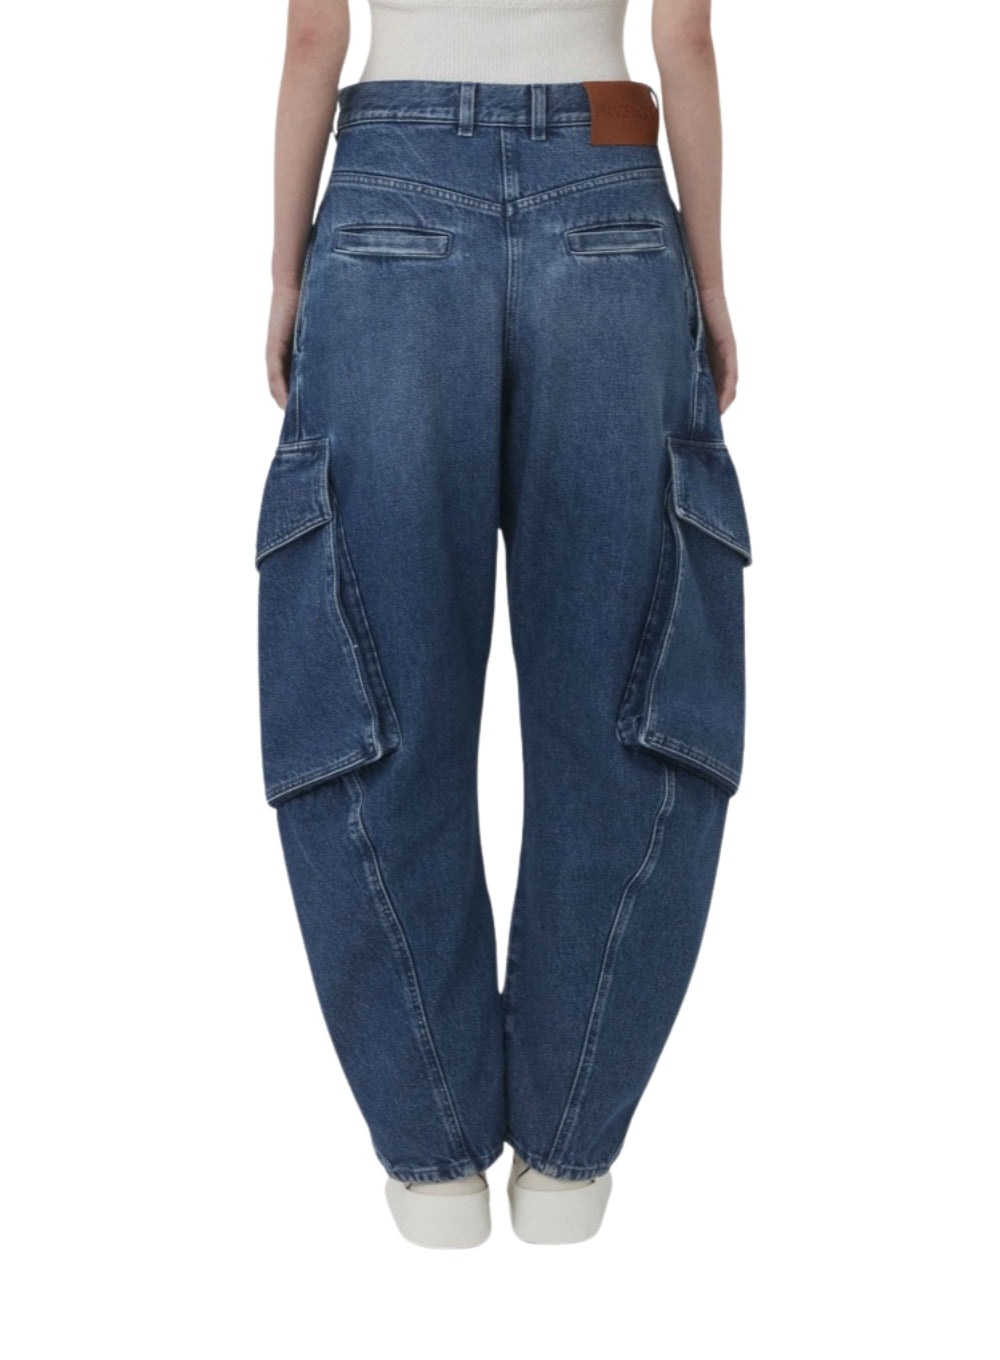 J.W. ANDERSON | Twisted Cargo Jeans